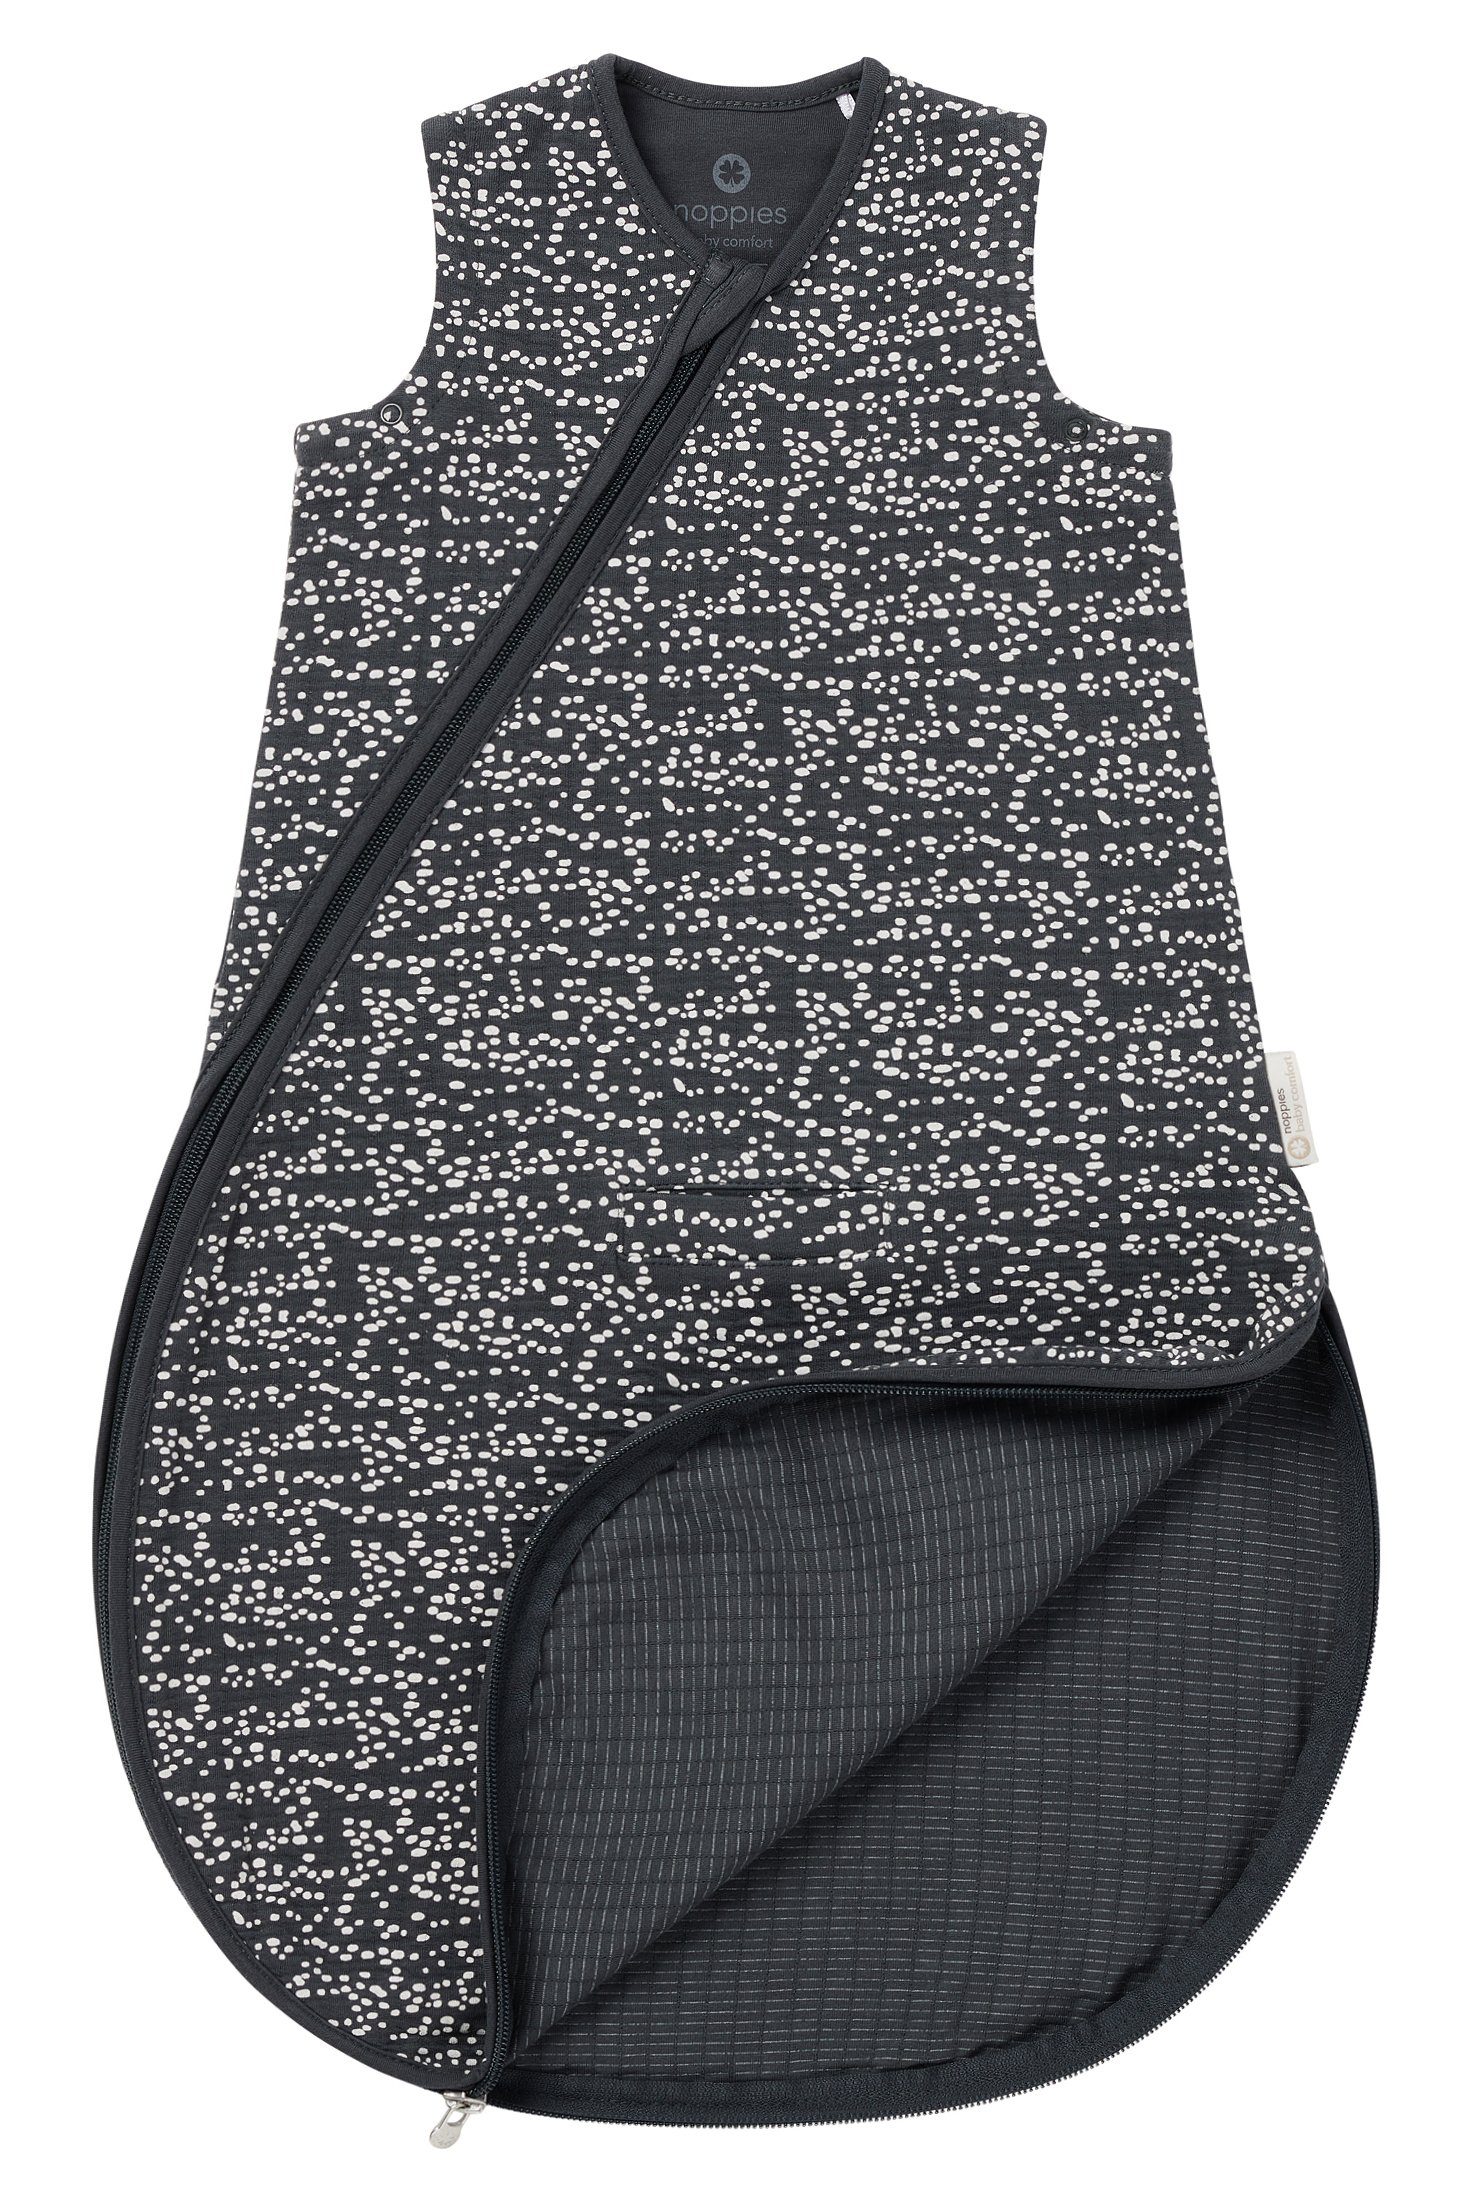 Noppies Babyschlafsack Dot (1 Iron Fancy Noppies Sommerschlafsack tlg) Baby Forged